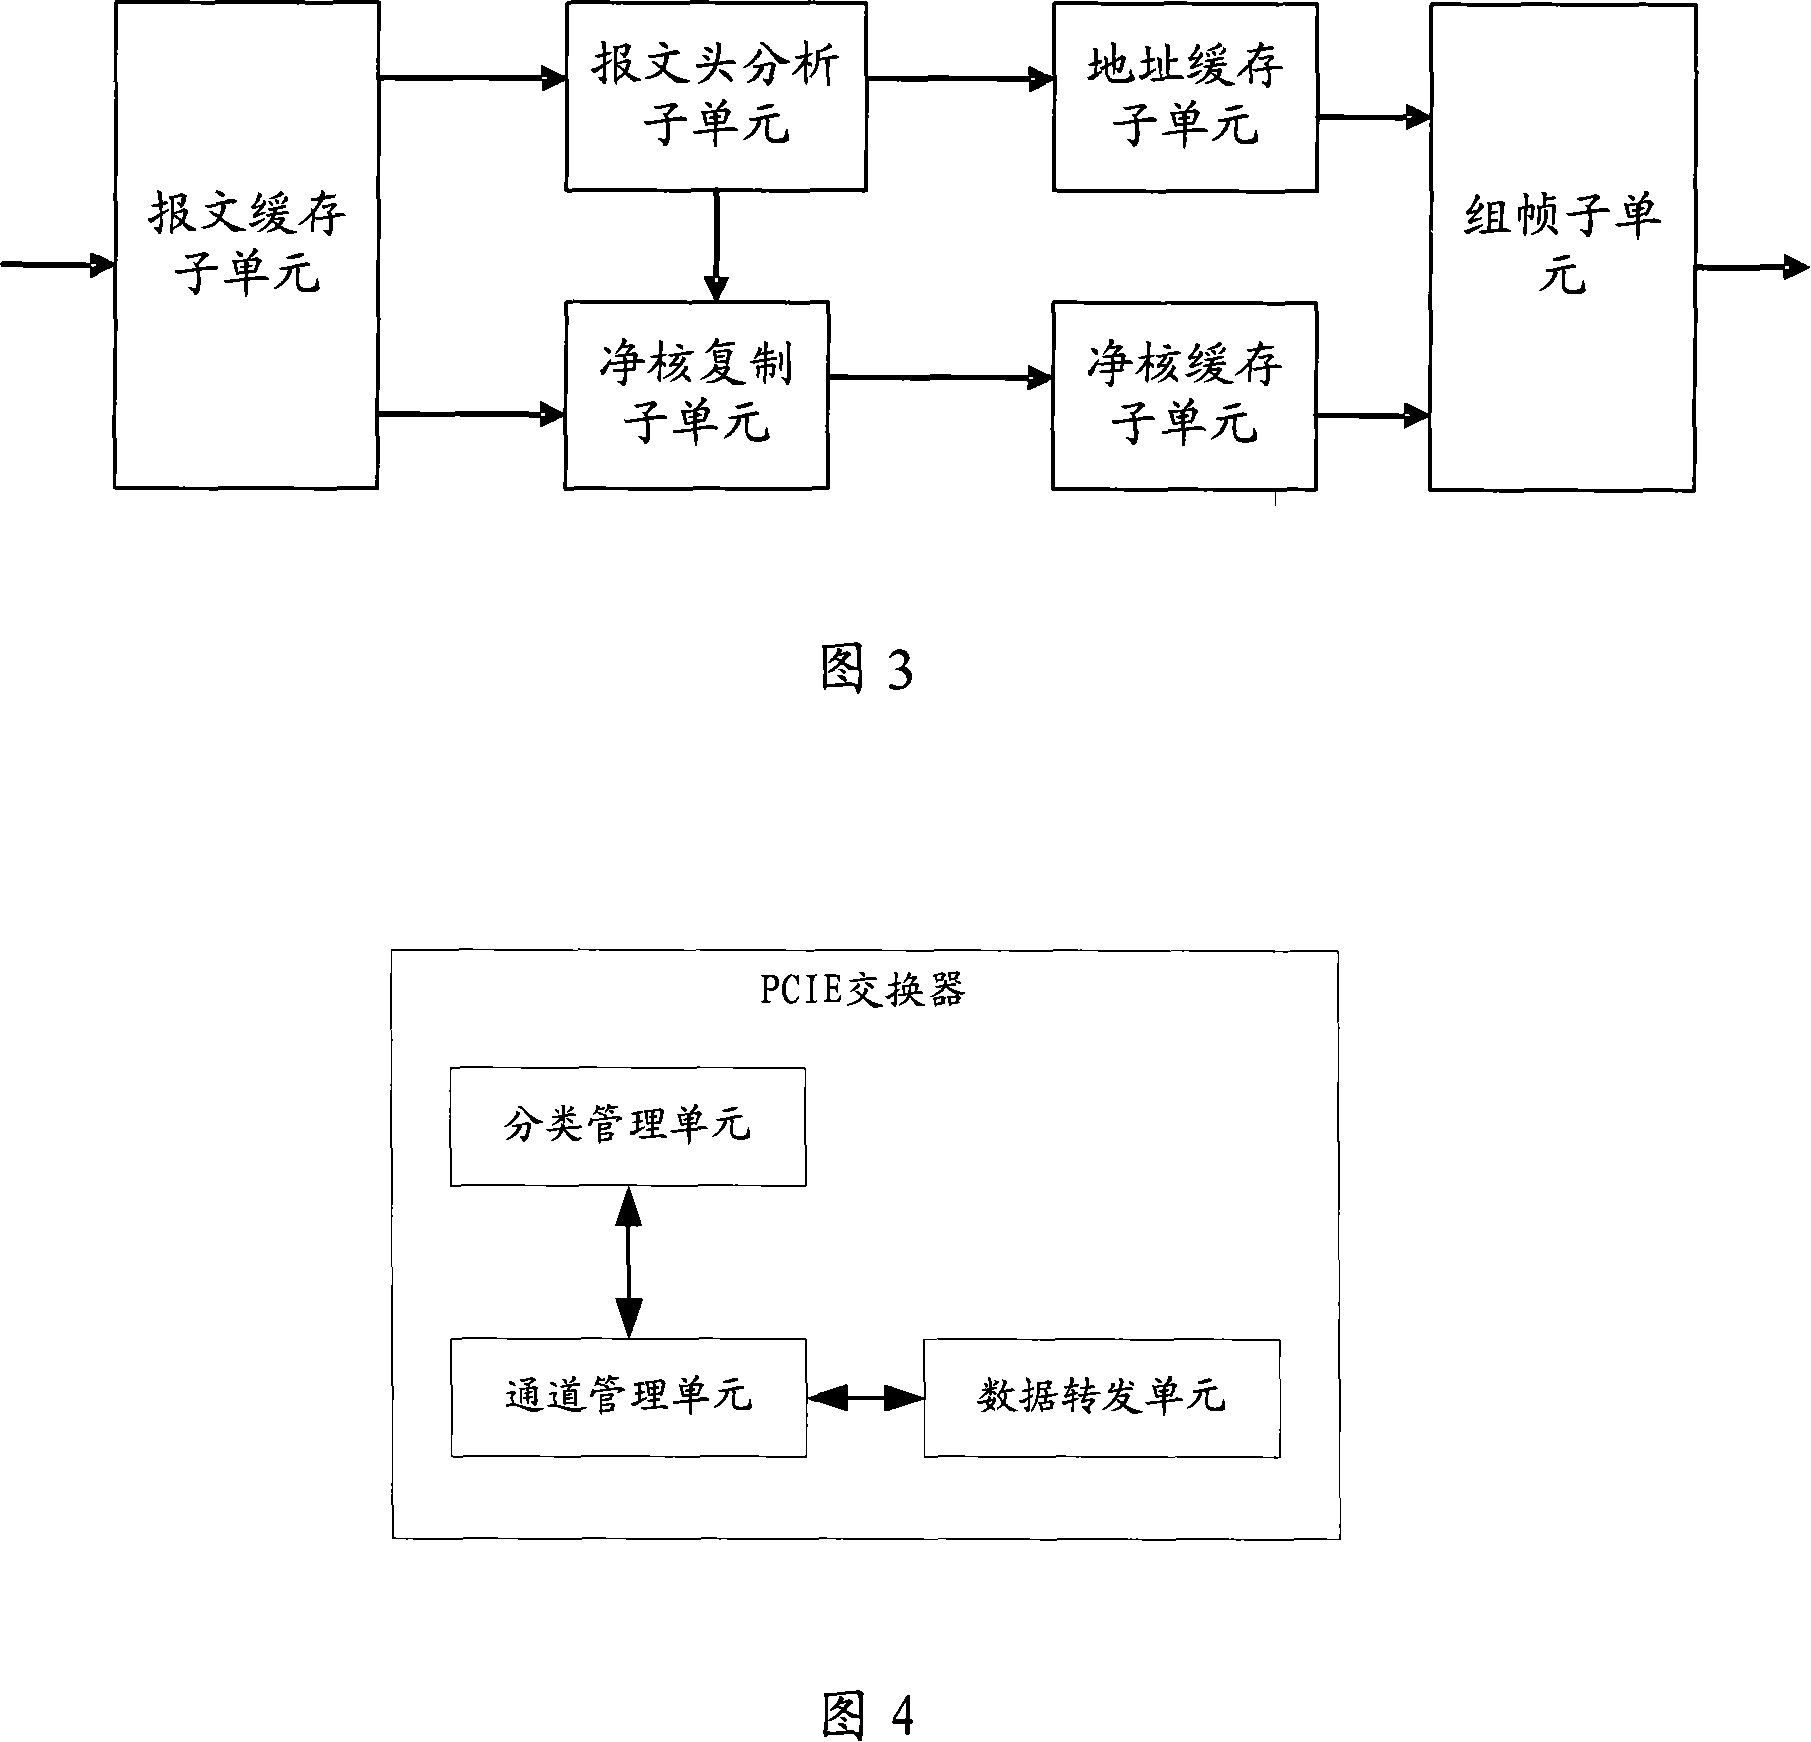 Multicast implementation method, system and device based on PCIE switching network